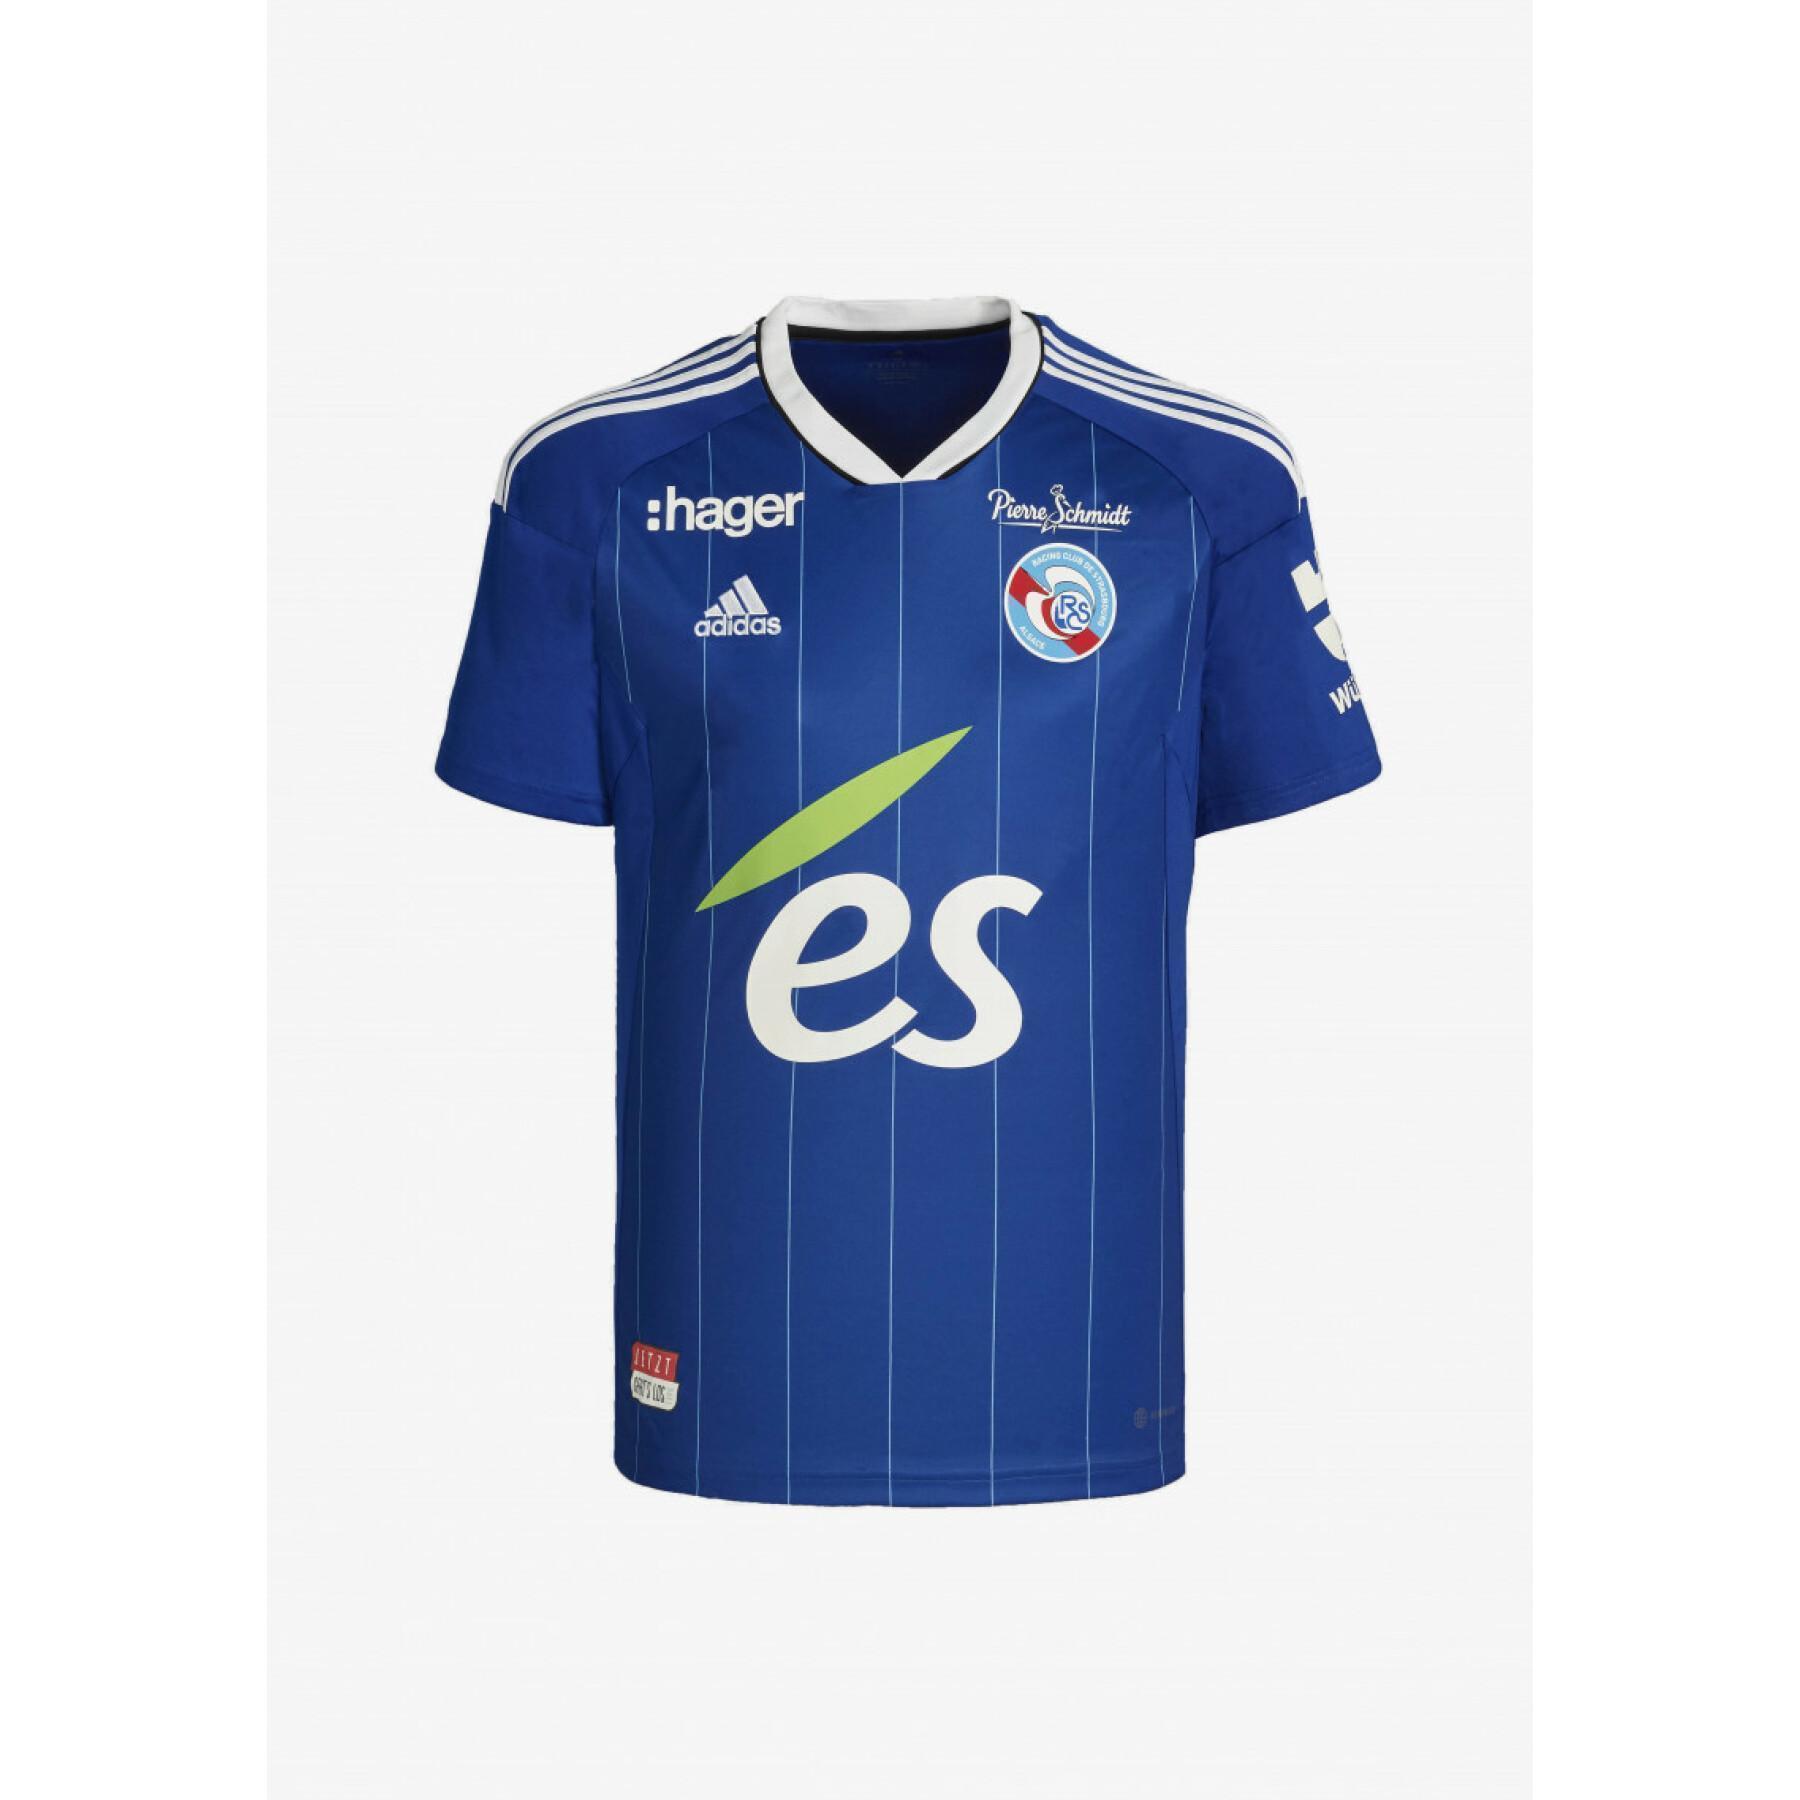 Home jersey child RC Strasbourg Alsace 2022/23